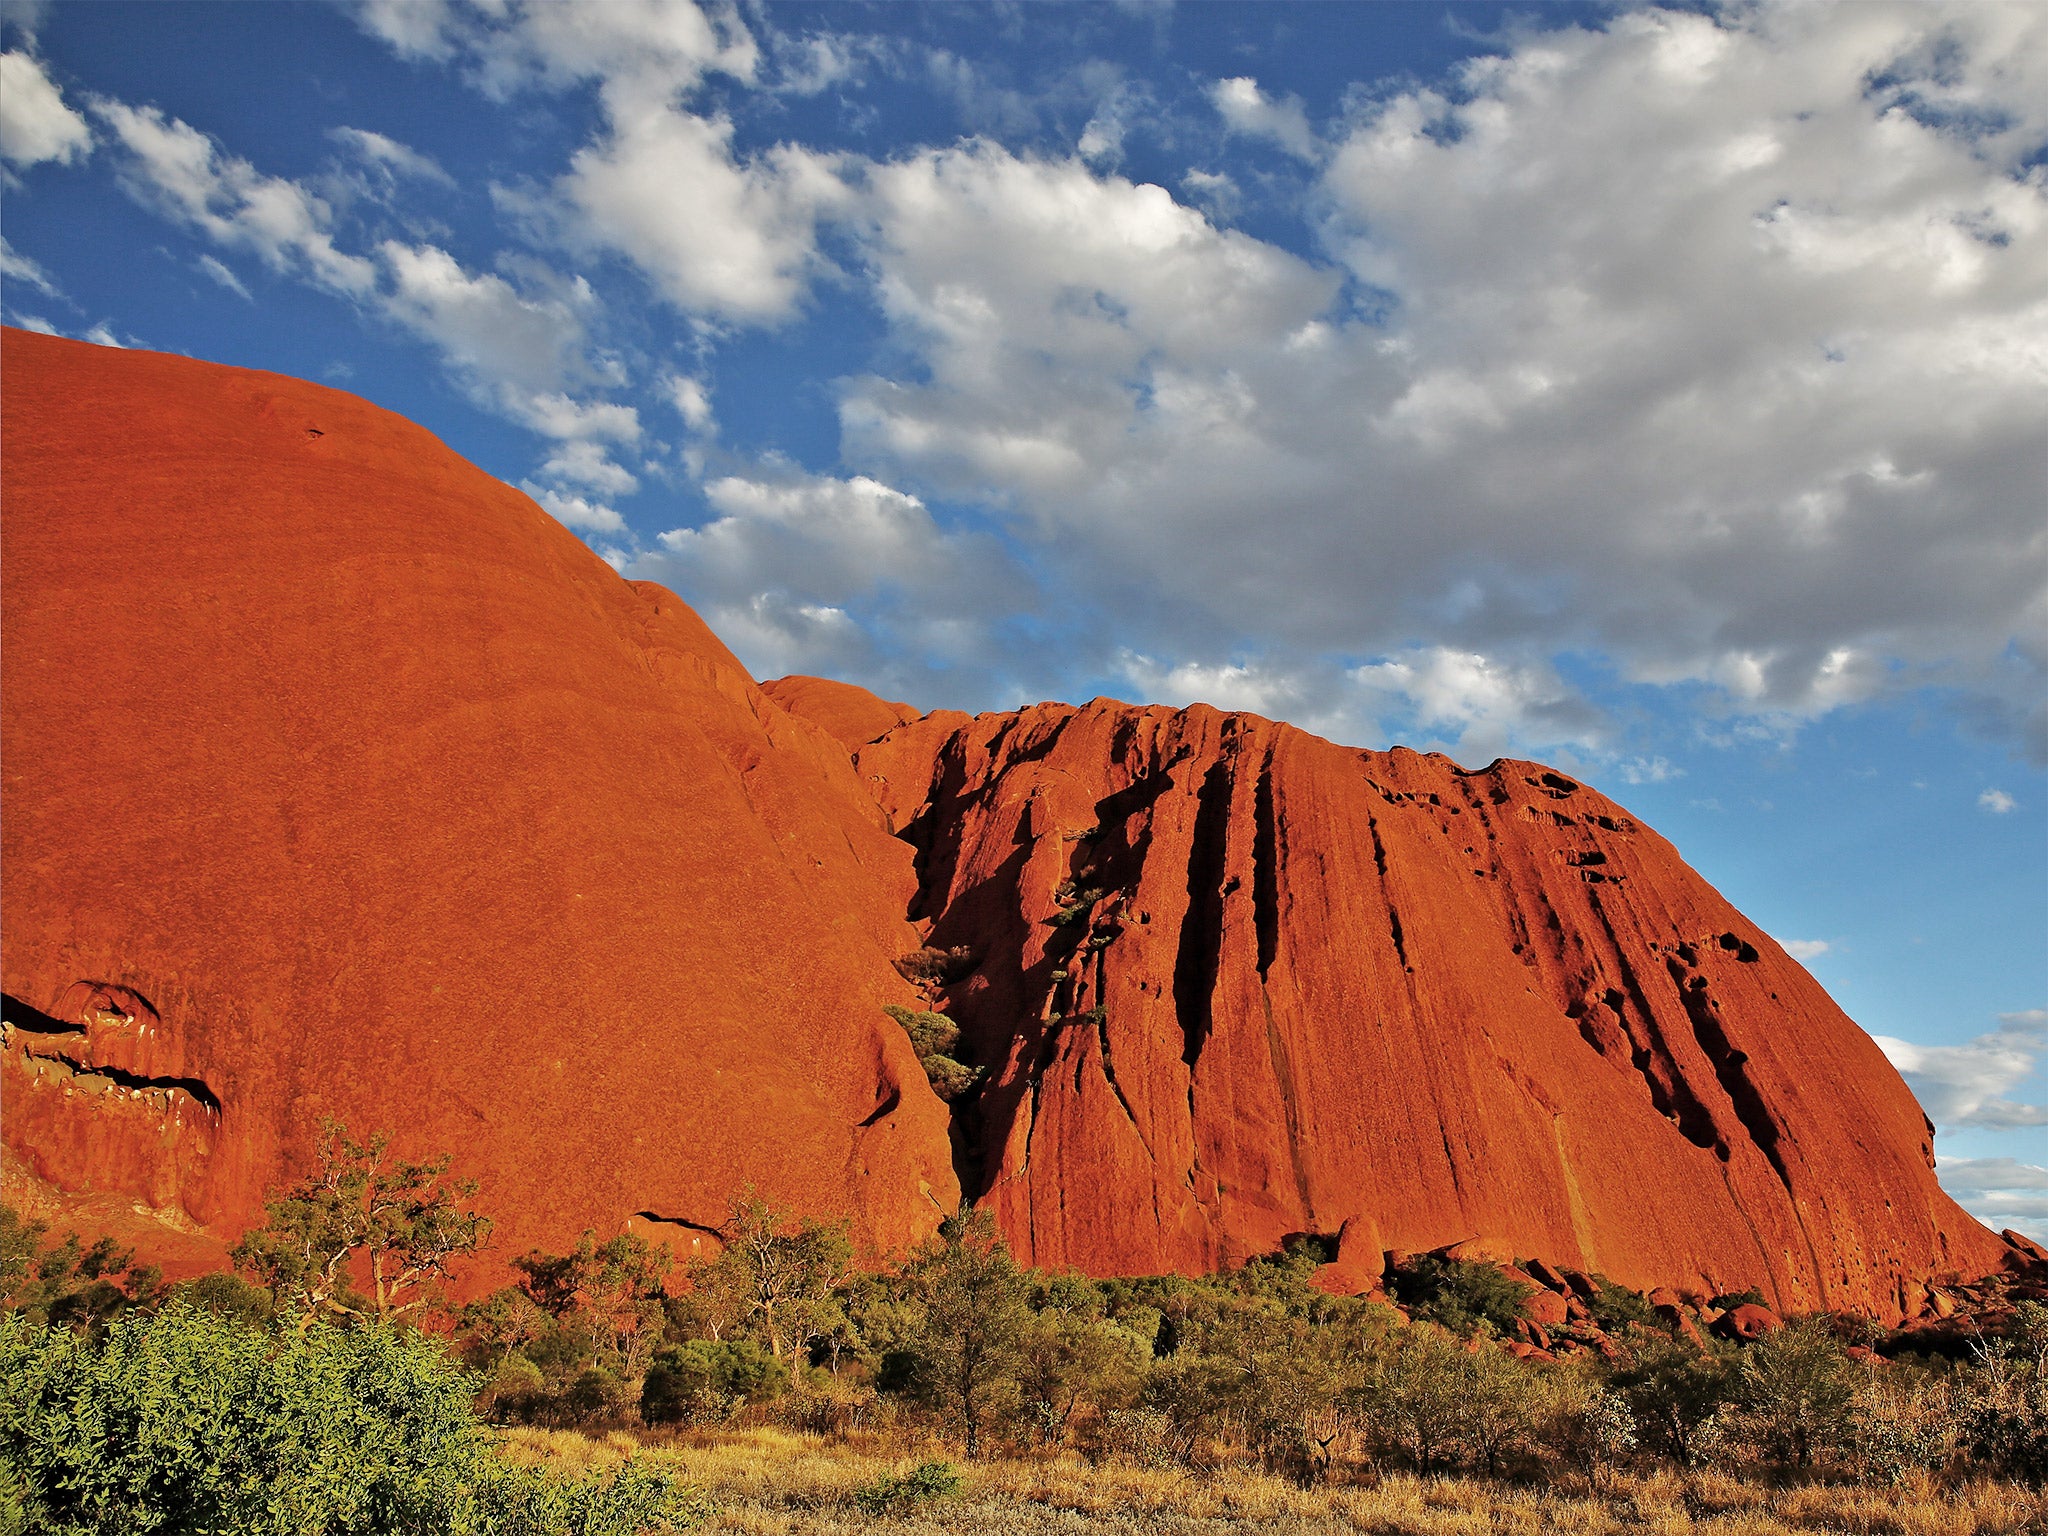 &#13;
Uluru, formerly Ayers Rock, is visited by over 250,000 people each year (Getty)&#13;